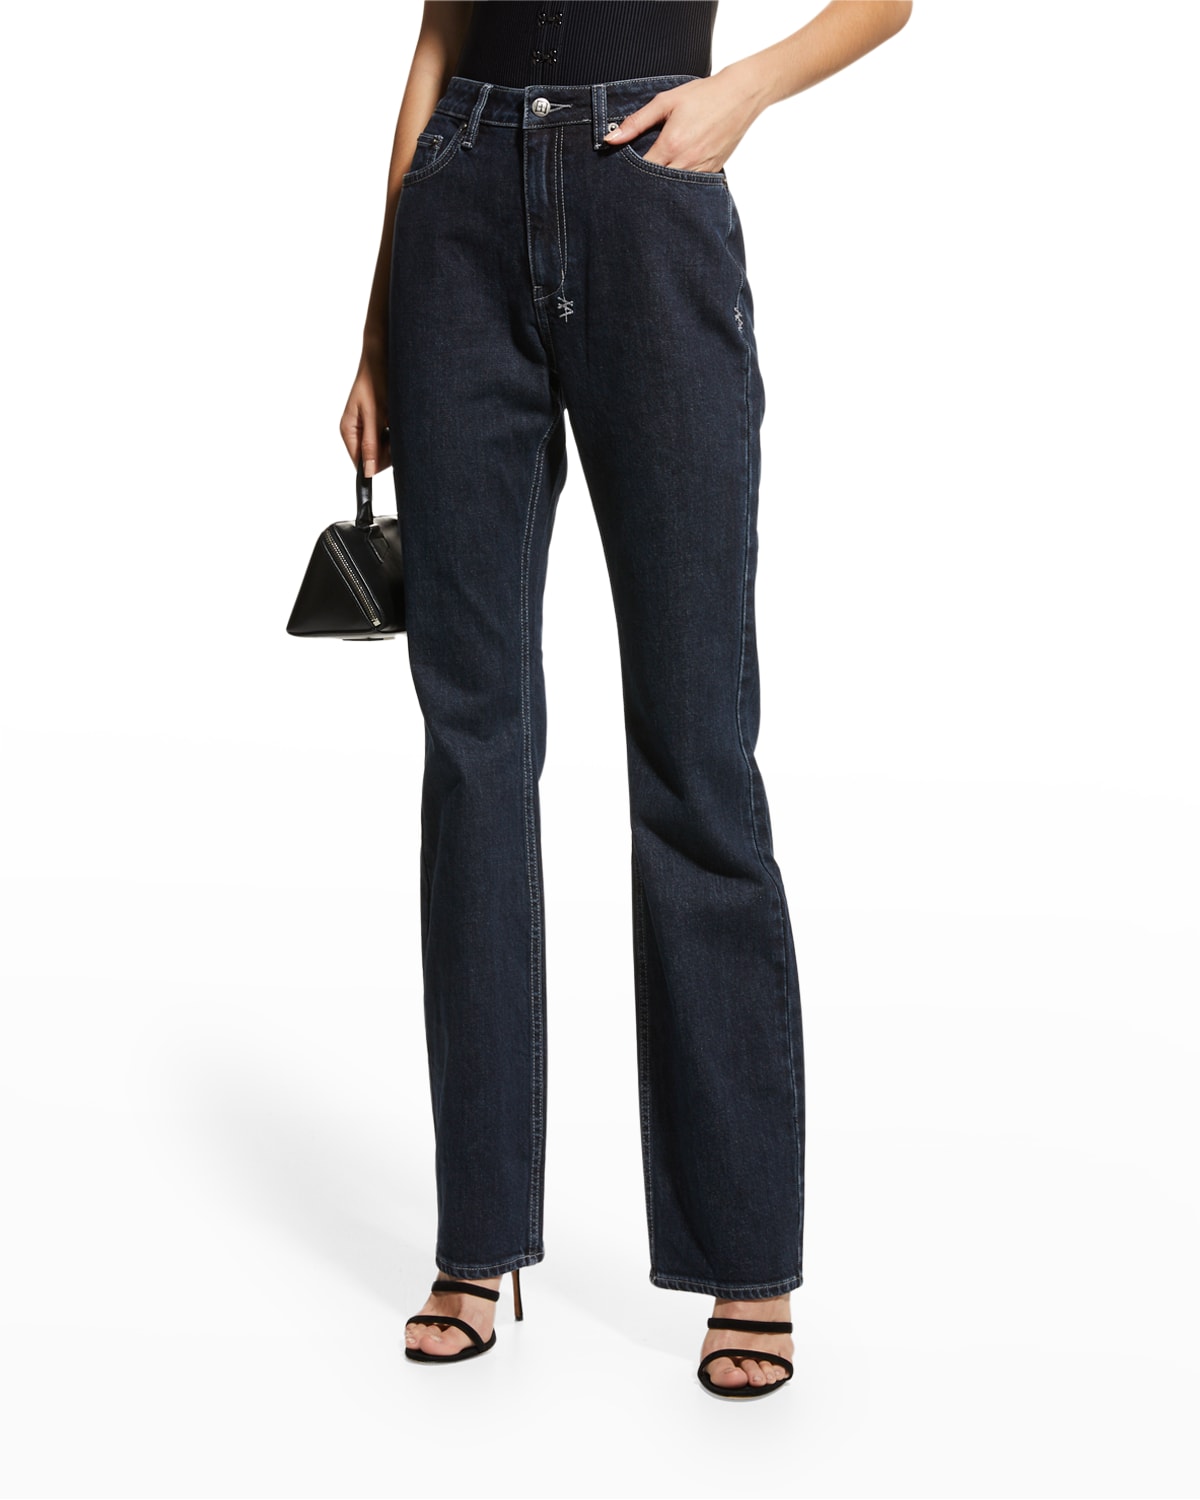 Soho Obscura Topstitched Bootcut Jeans